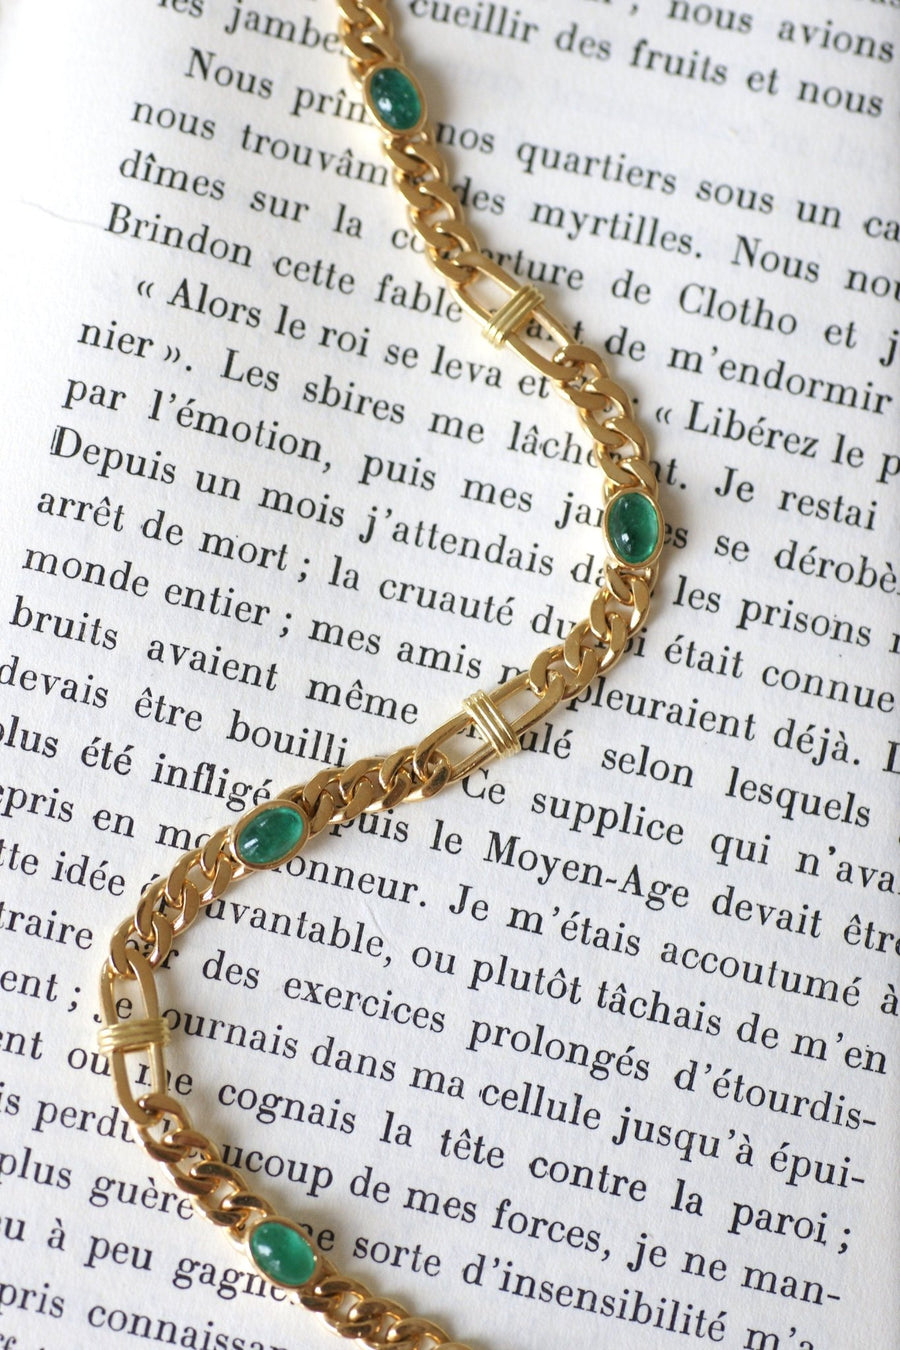 Yellow gold and emeralds bracelet - Penelope Gallery